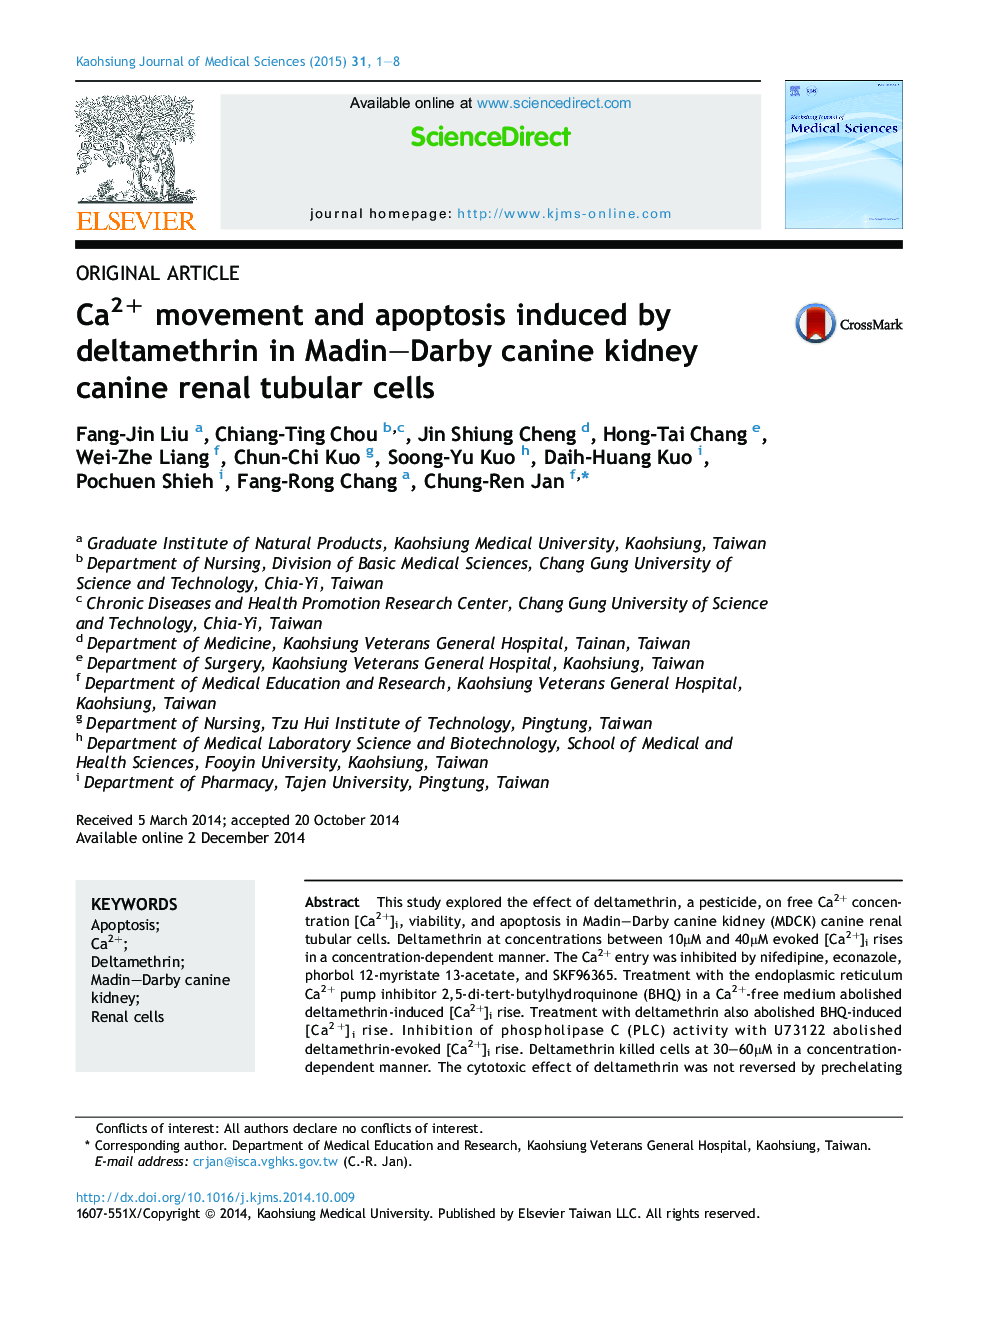 Ca2+ movement and apoptosis induced by deltamethrin in Madin-Darby canine kidney canine renal tubular cells